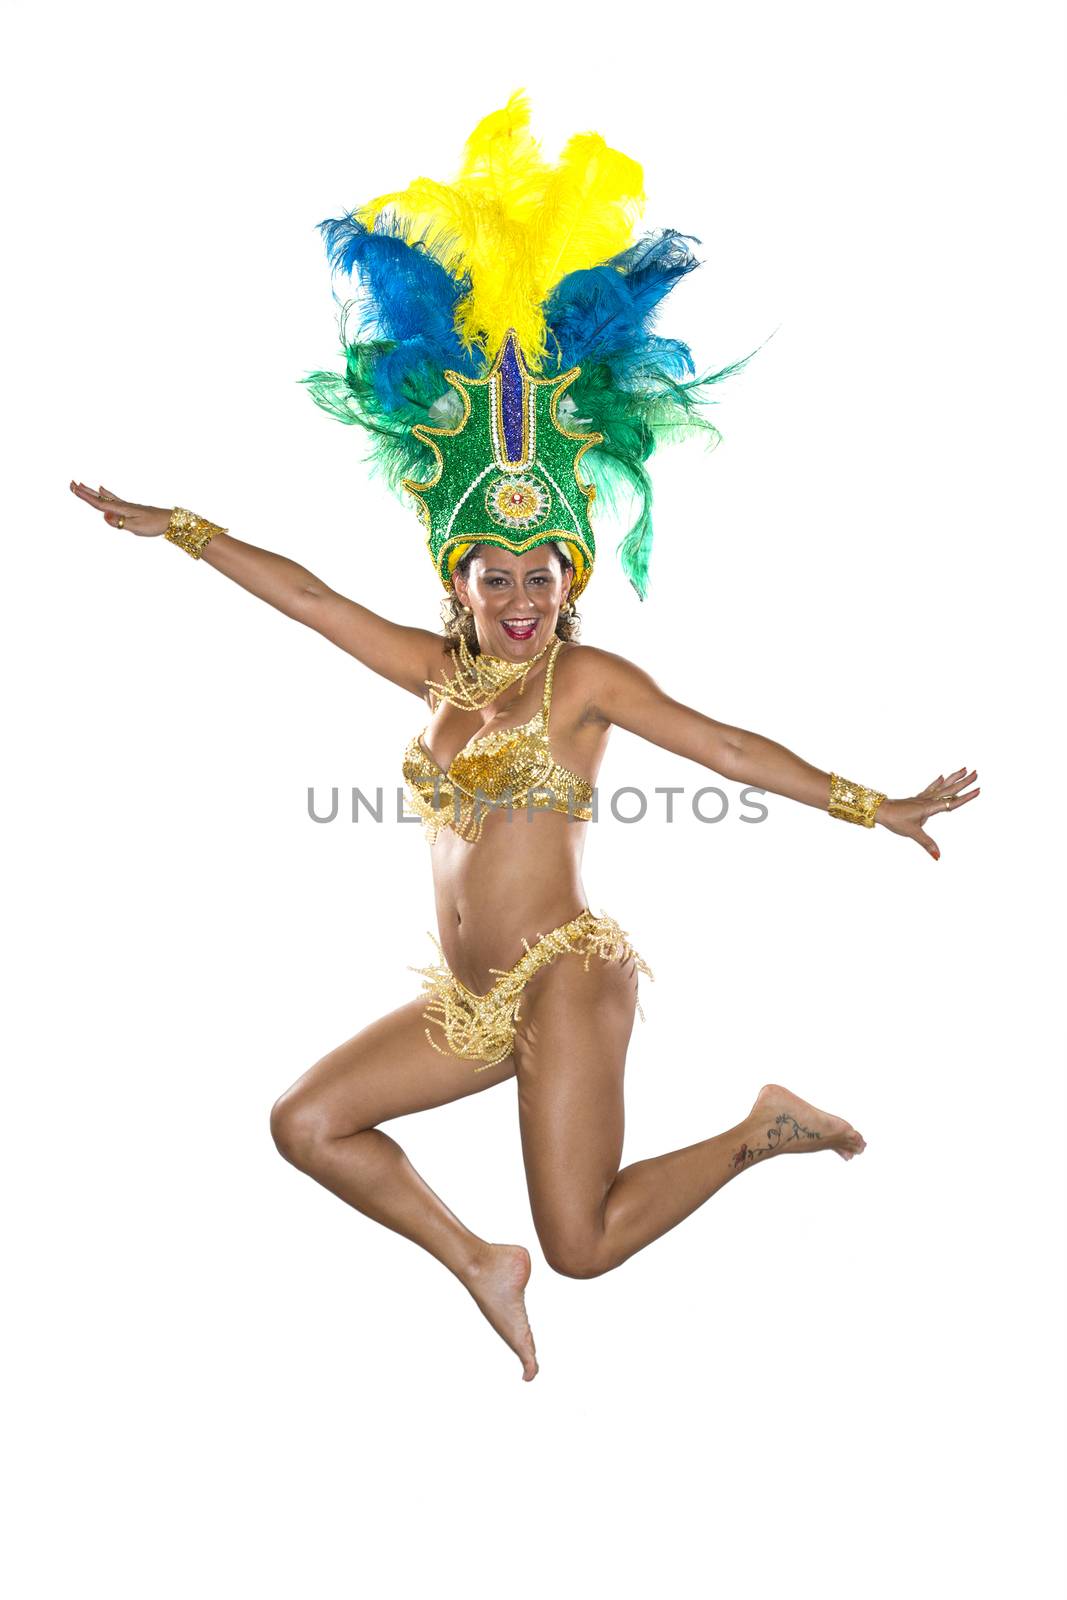 Carnival, Samba Dancer, jumping, dressed in feather costume by BrazilPhoto